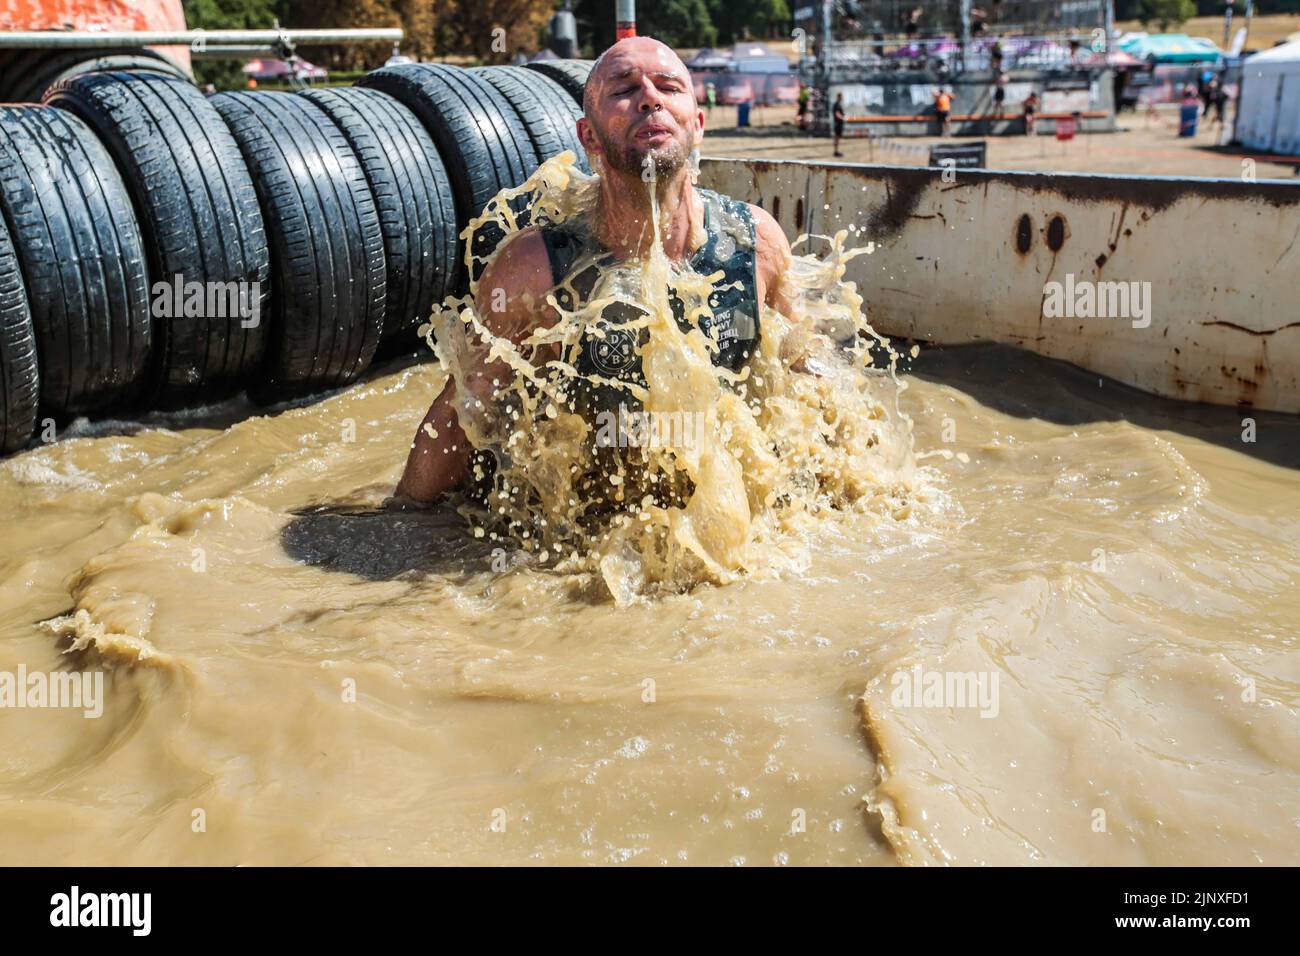 London UK 14 August 2022 Competitors of the Tough Mudder event in Morden Park London cherishing the challenge of conquering the different obstacles put between them and victory, Paul Quezada-Neiman/Alamy Live News f Stock Photo